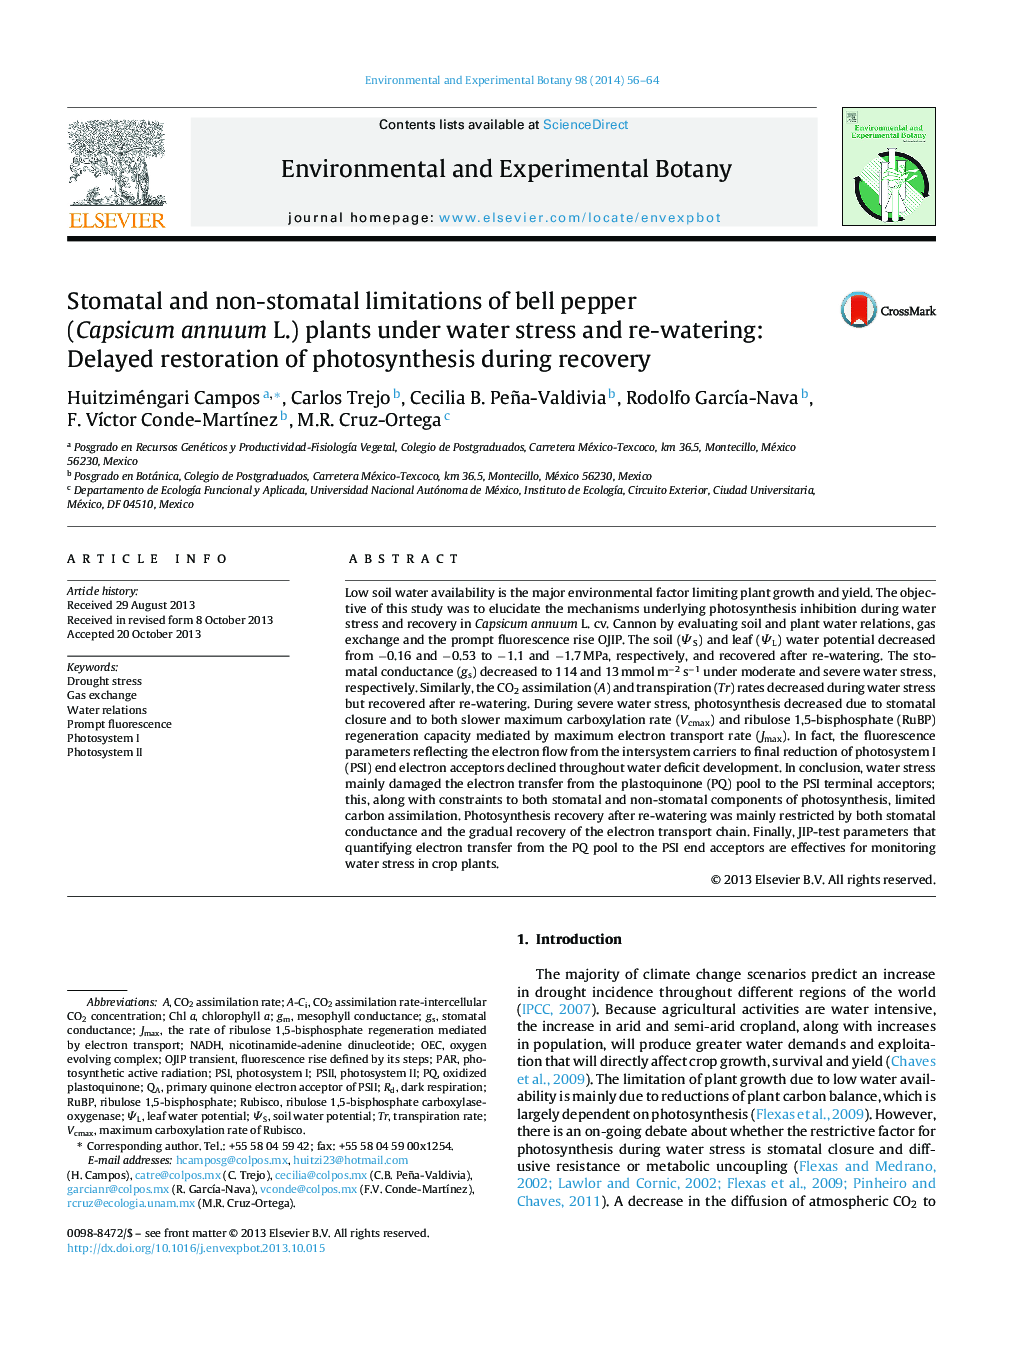 Stomatal and non-stomatal limitations of bell pepper (Capsicum annuum L.) plants under water stress and re-watering: Delayed restoration of photosynthesis during recovery